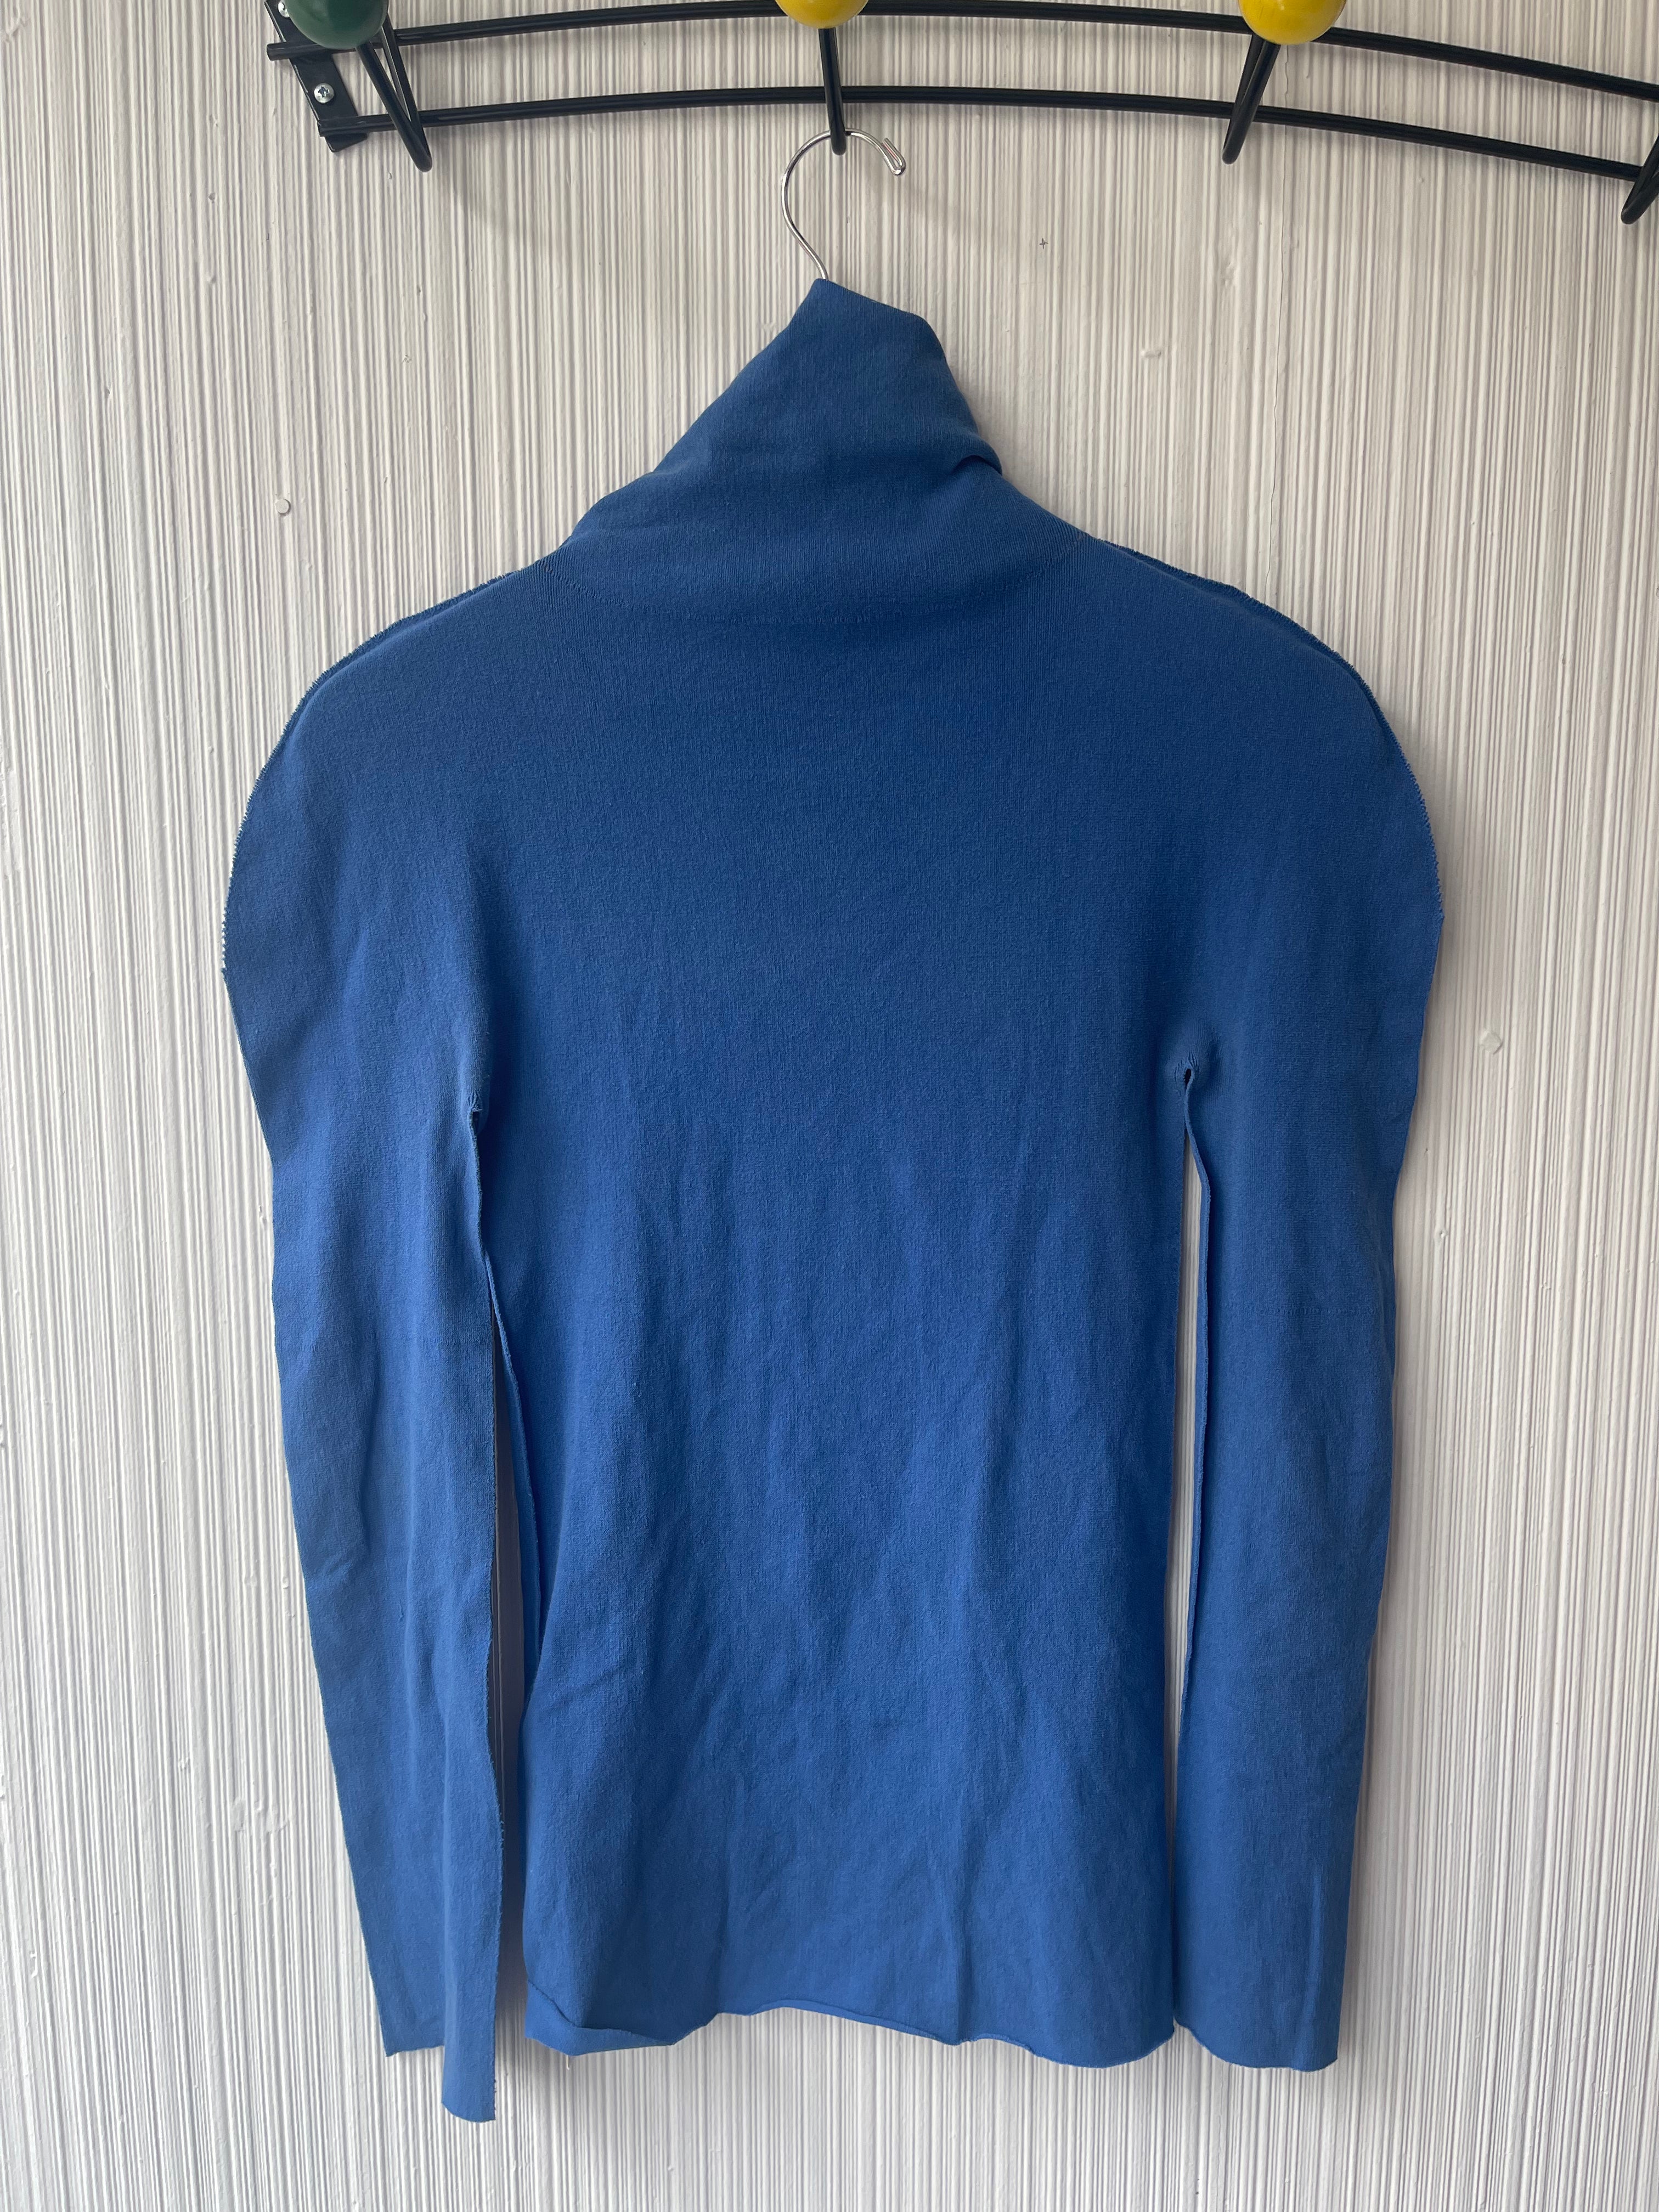 Issey Miyake APOC blue woven net turtle neck top